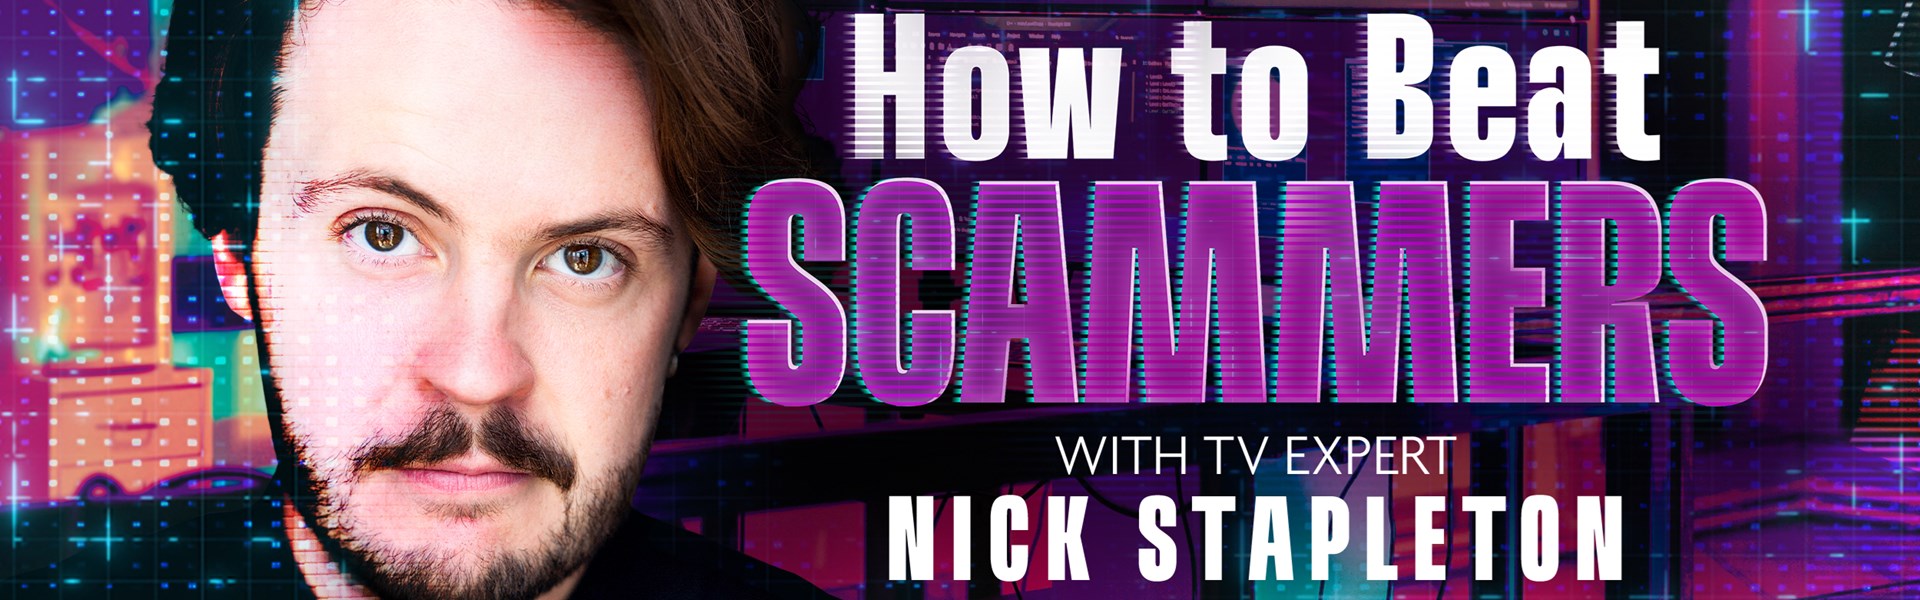 Nick Stapleton's How To Beat Scammers